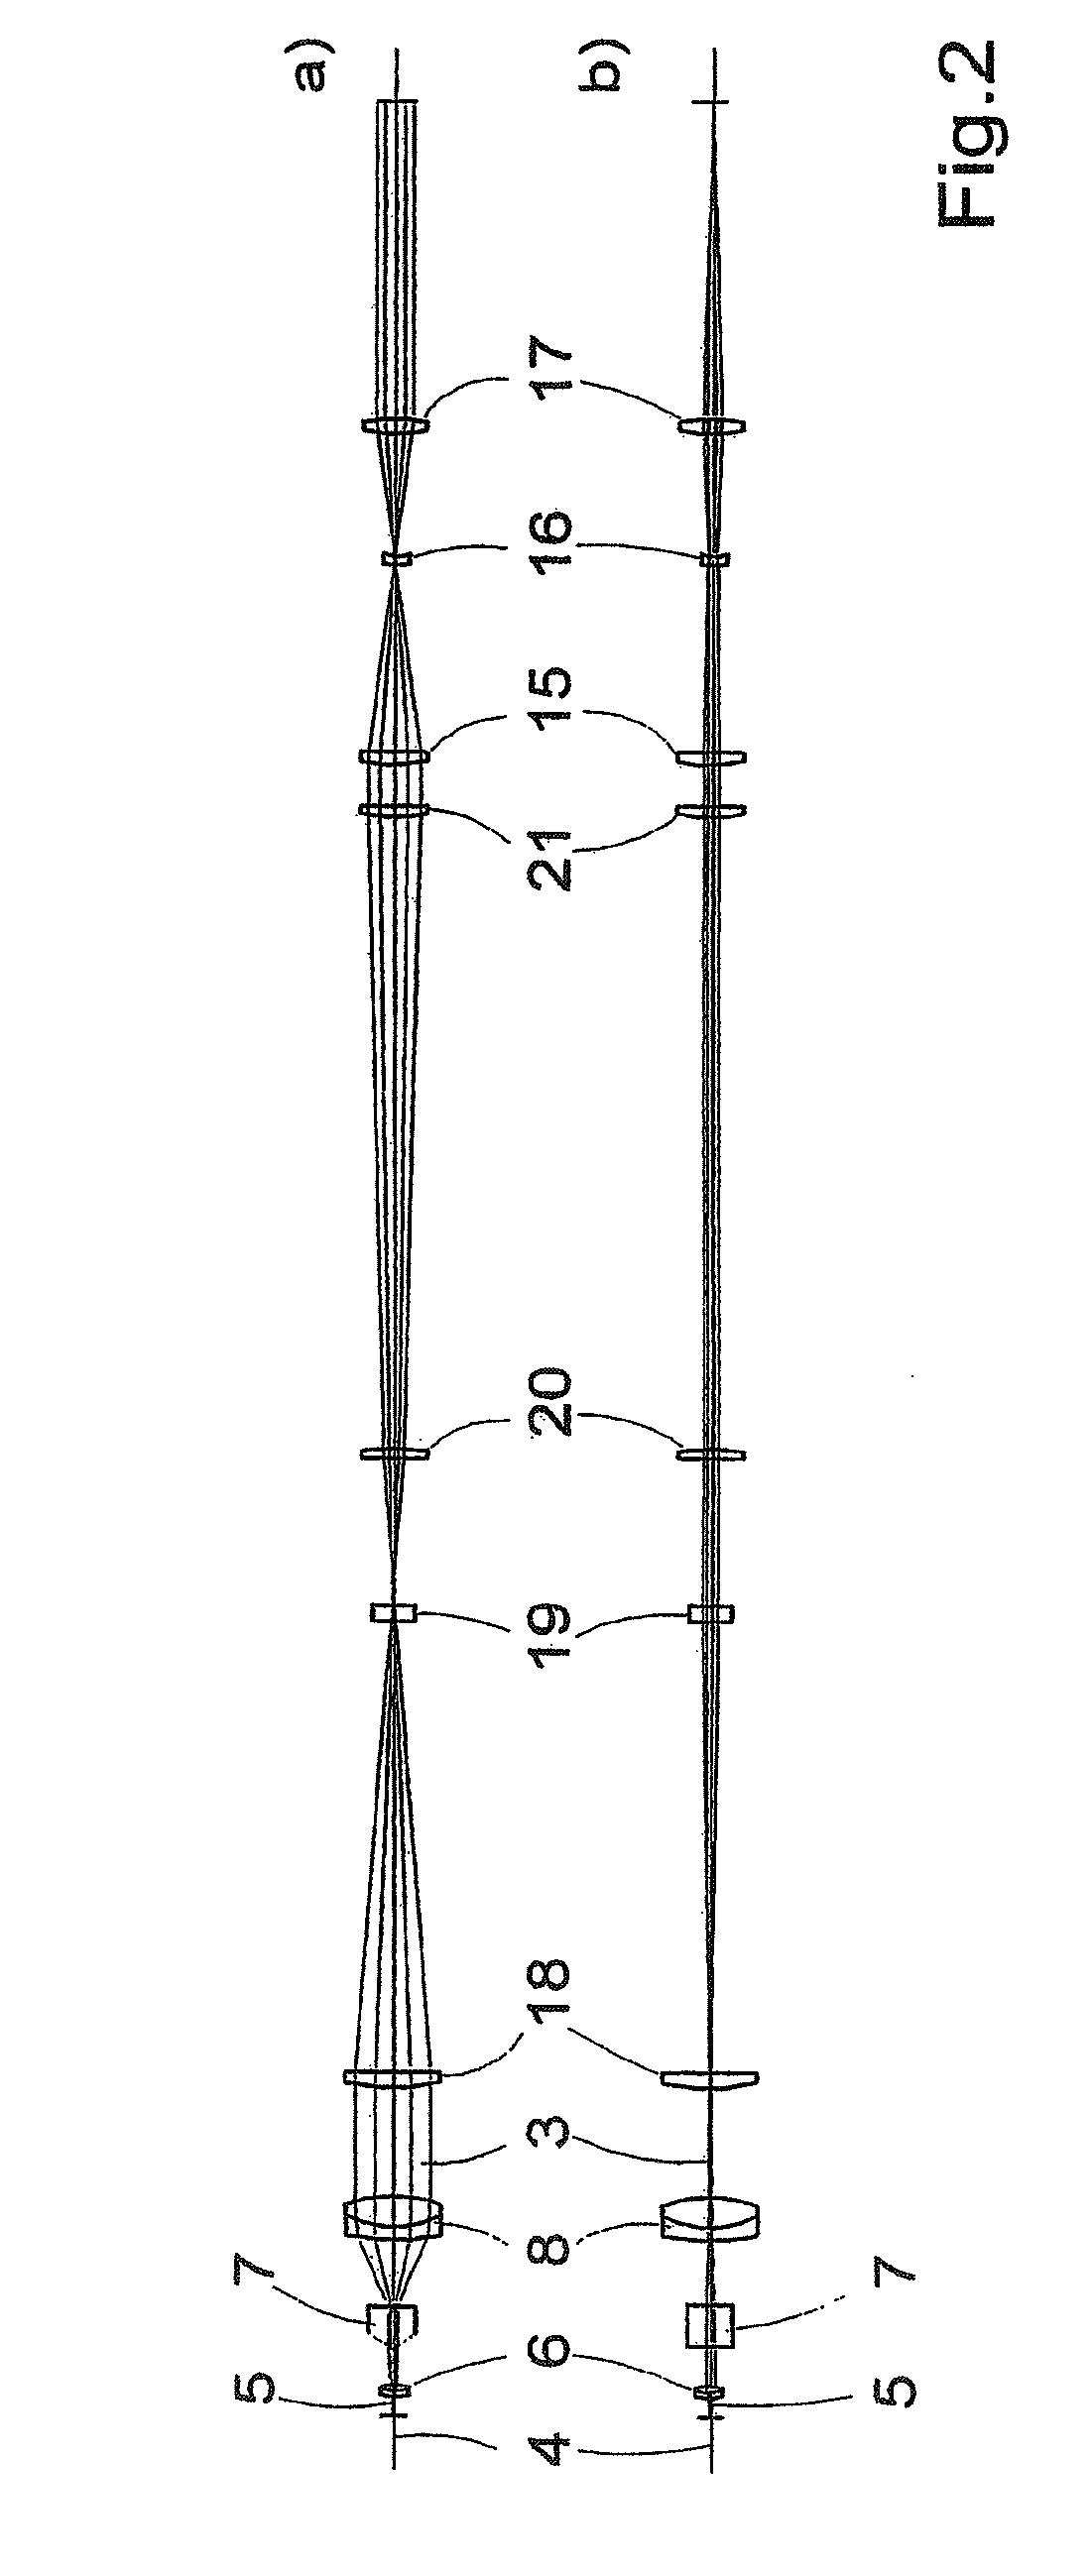 Optical arrangement for the production of a light-sheet